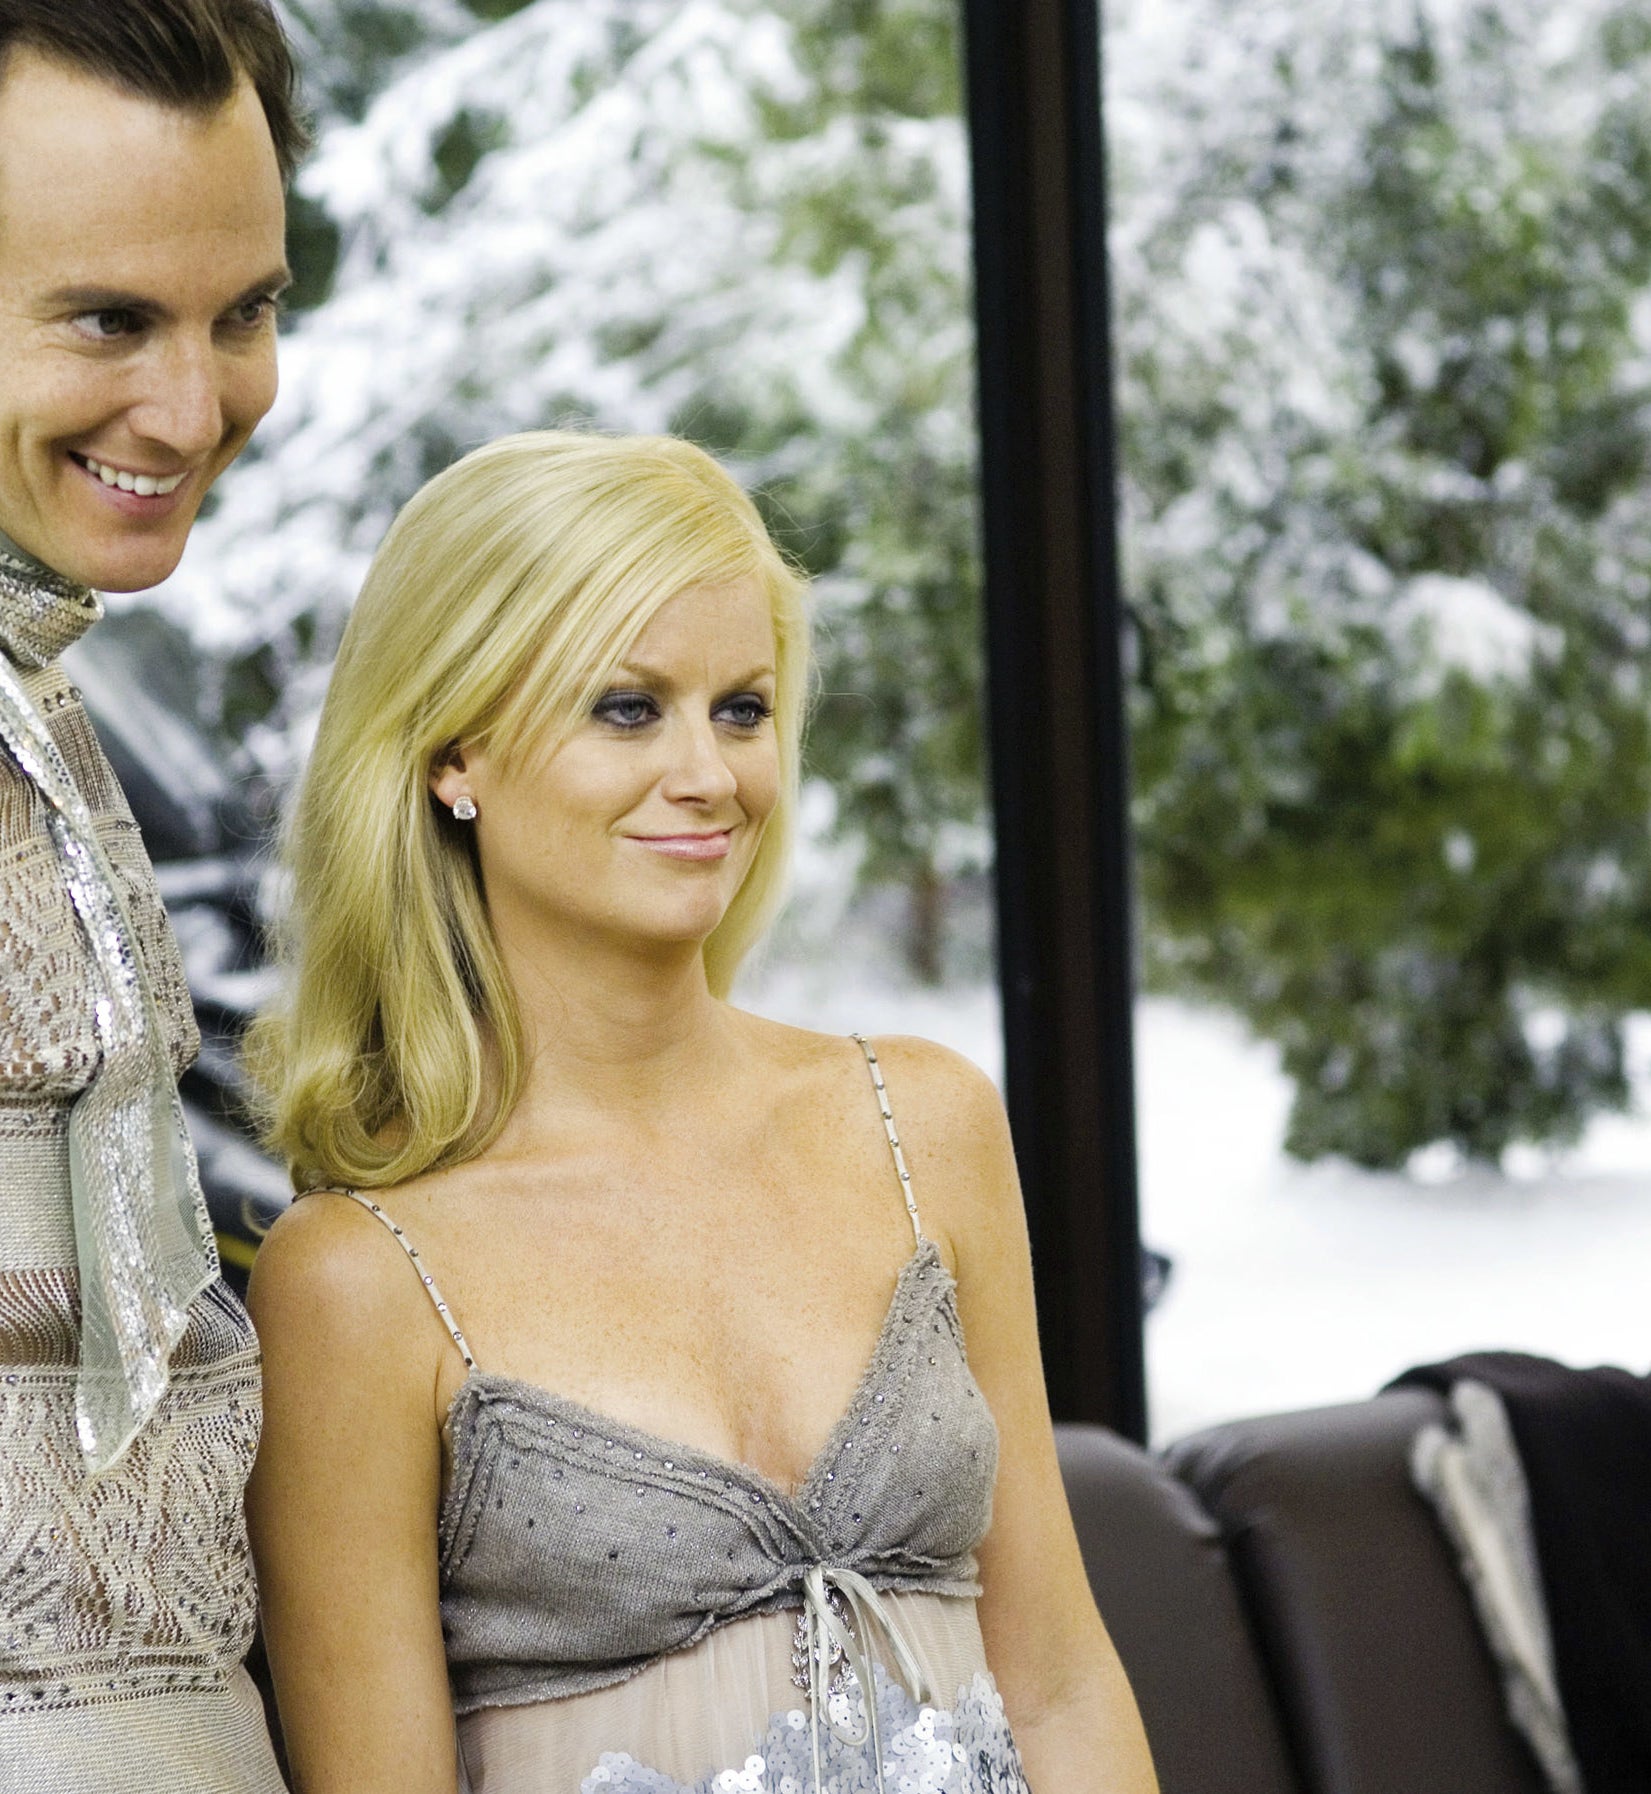 Will Arnett and Amy Poehler in Blades of Glory